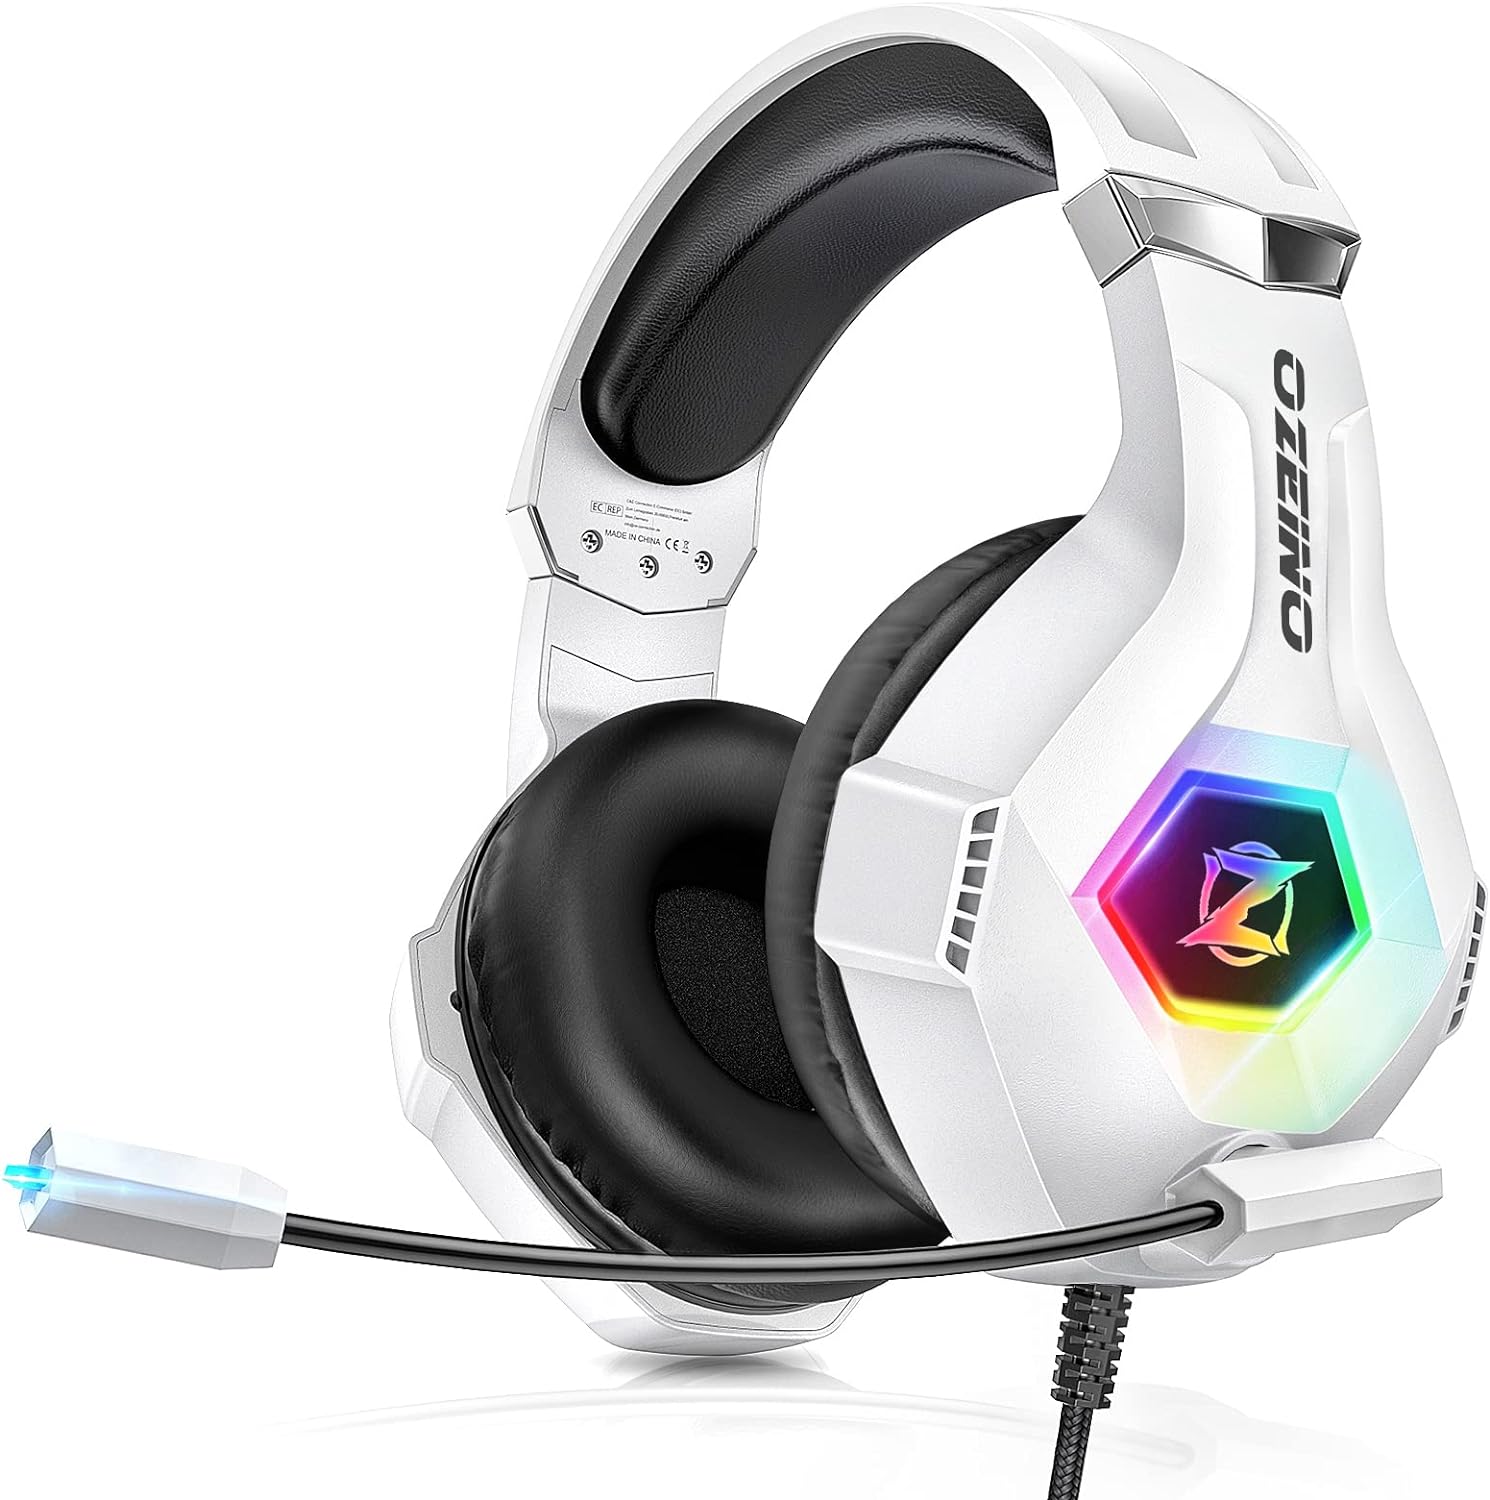 Gaming Headset for PC, PS4, PS5, Xbox Headset with 7.1 Surround Sound, Gaming Headphones with Noise Cancelling Mic RGB Light Over Ear Headphones for Xbox Series X/S, Switch